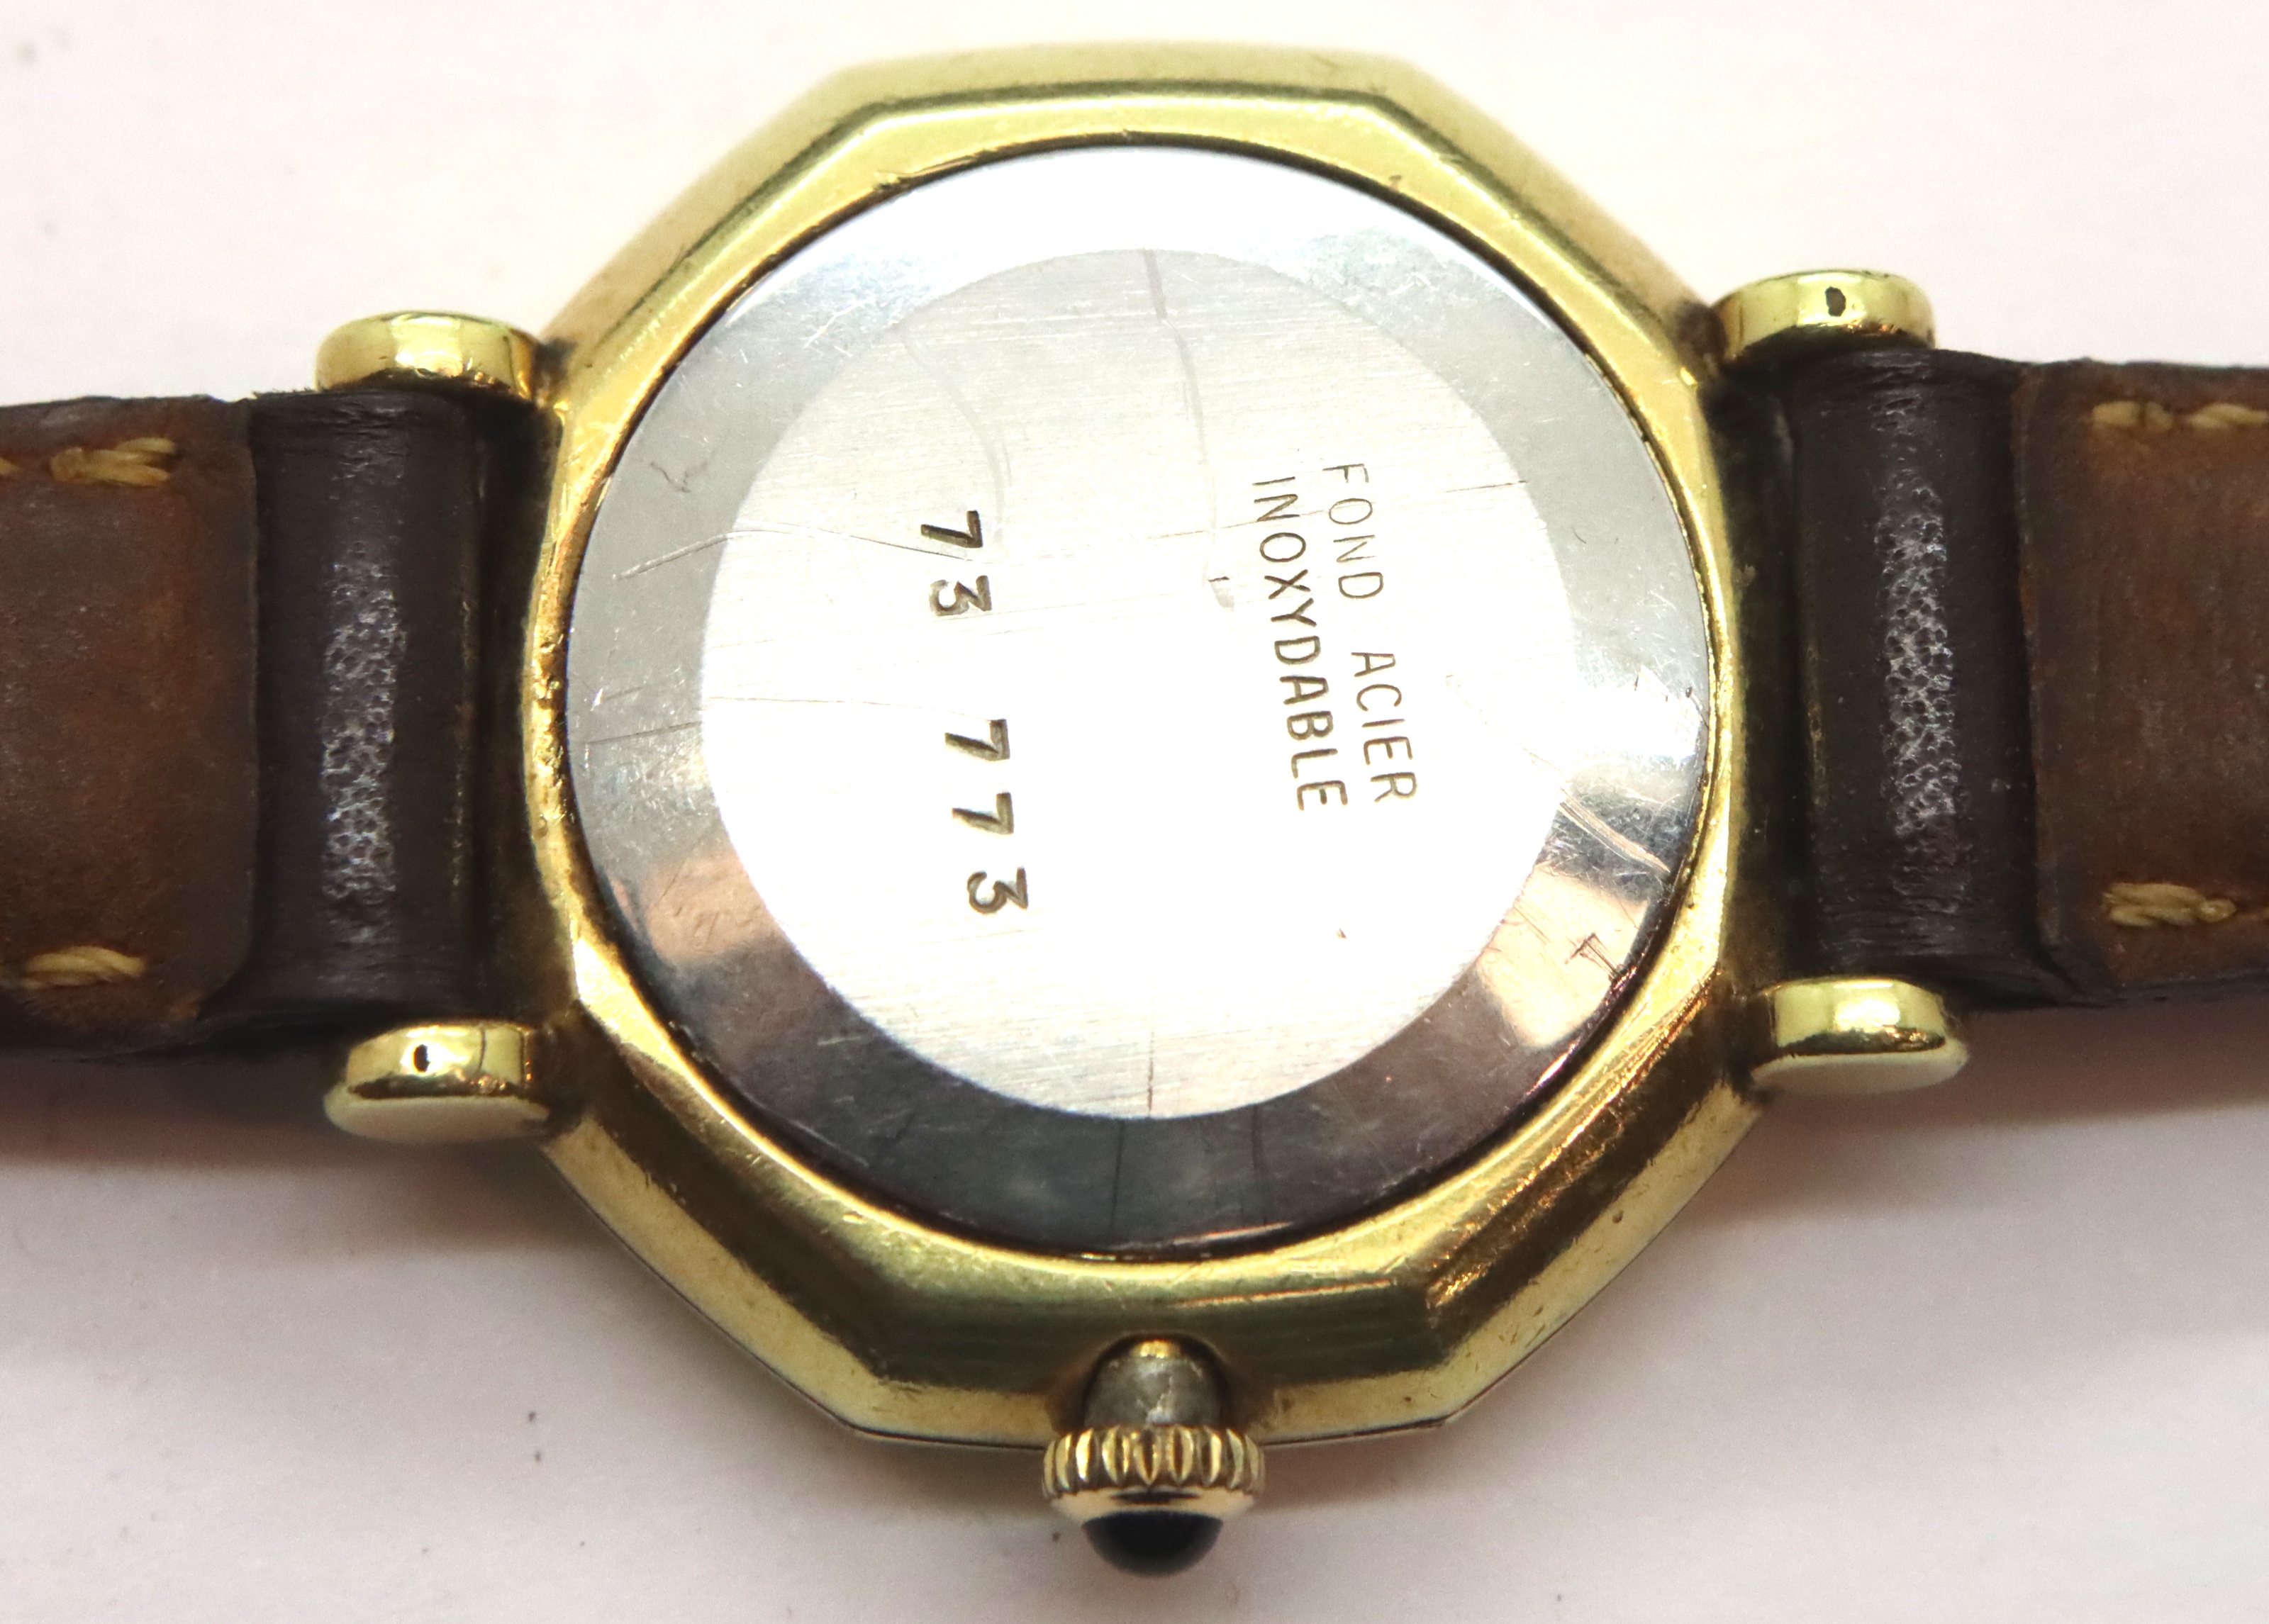 Emile Pequignet ladies Swiss wristwatch with octagonal face, black dial, gold hands on original - Image 2 of 3